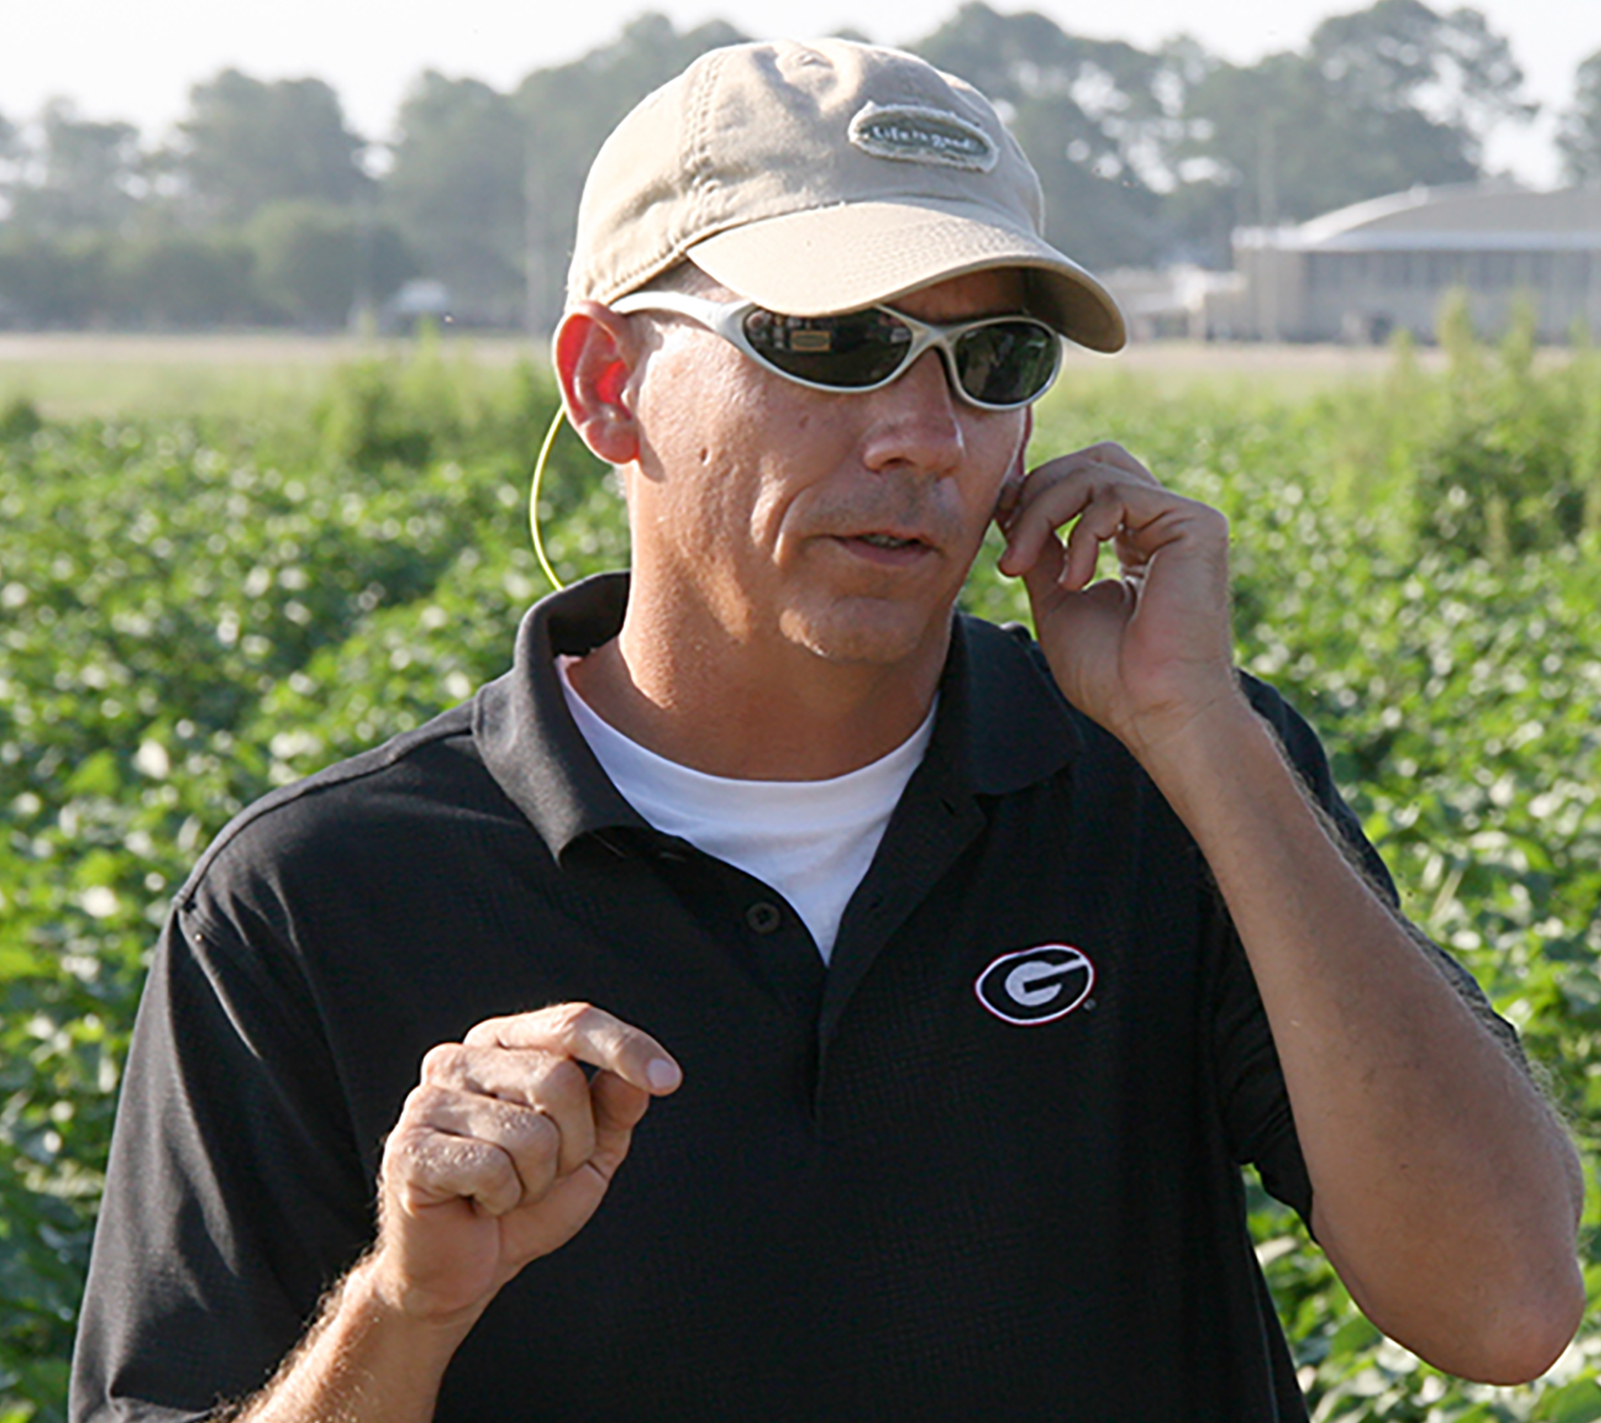 UGA weed scientist Stanley Culpepper speaks during the Sunbelt Field Day in 2015. He is among the scheduled presenters during this year's field day on July 25, 2019.